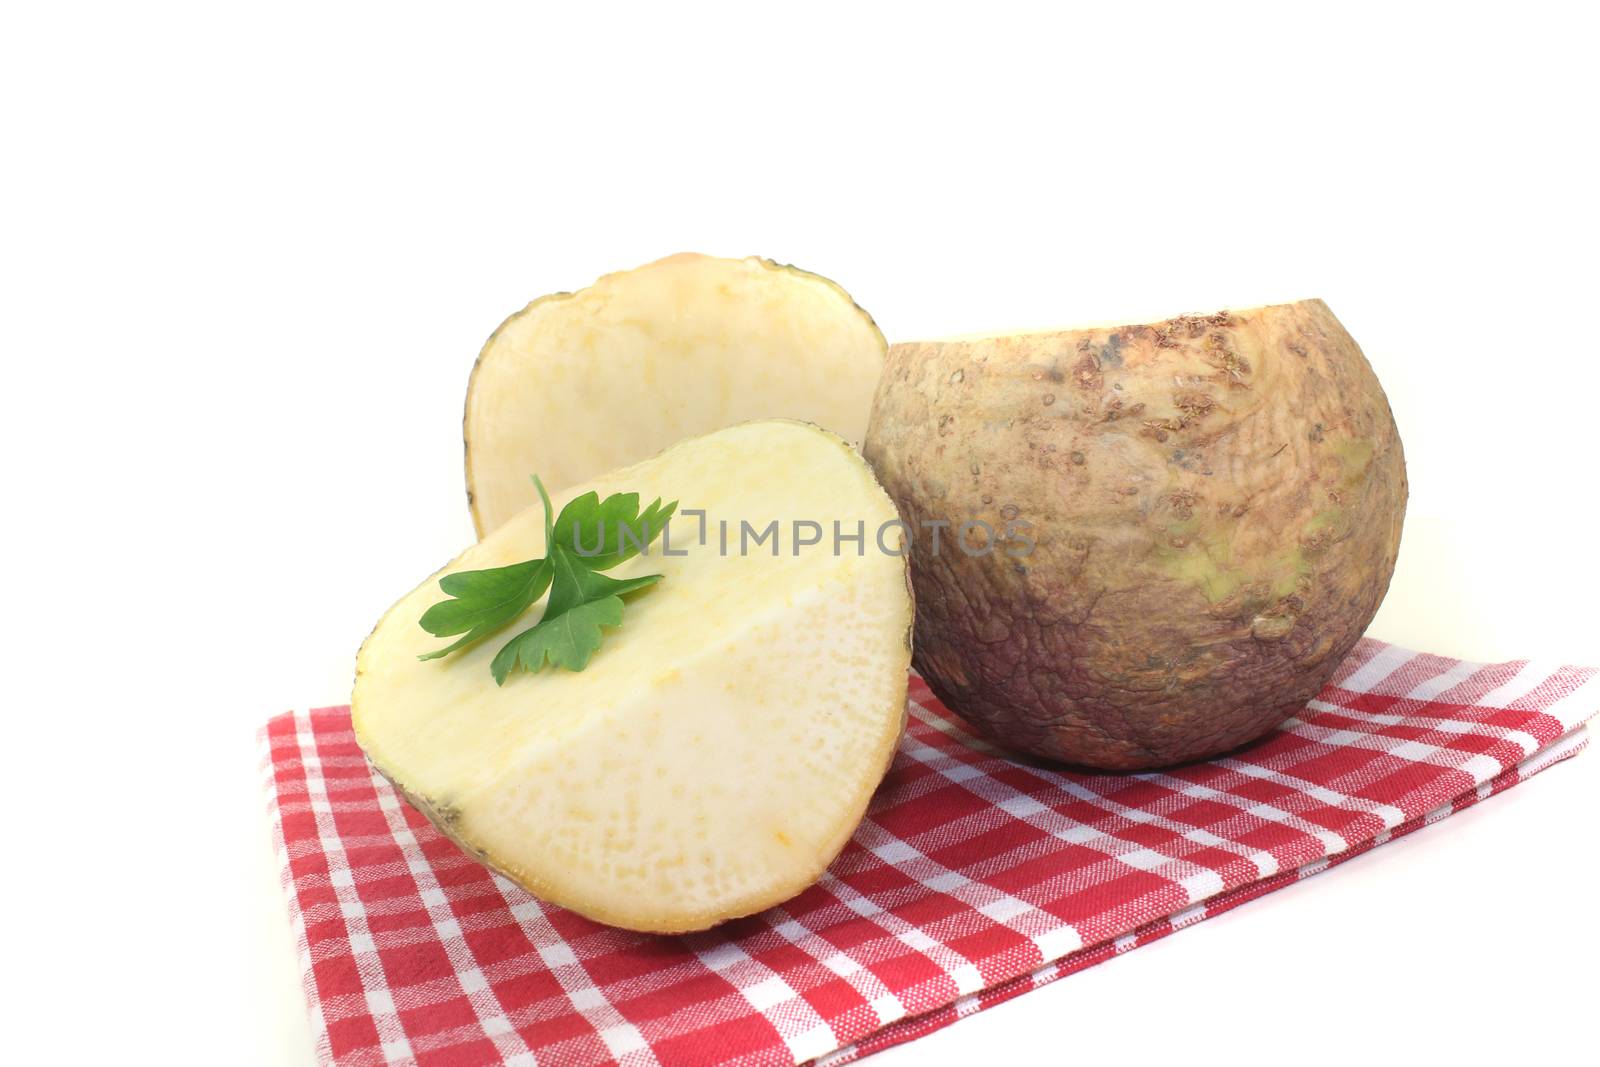 rutabaga with parsley and napkin on a light background